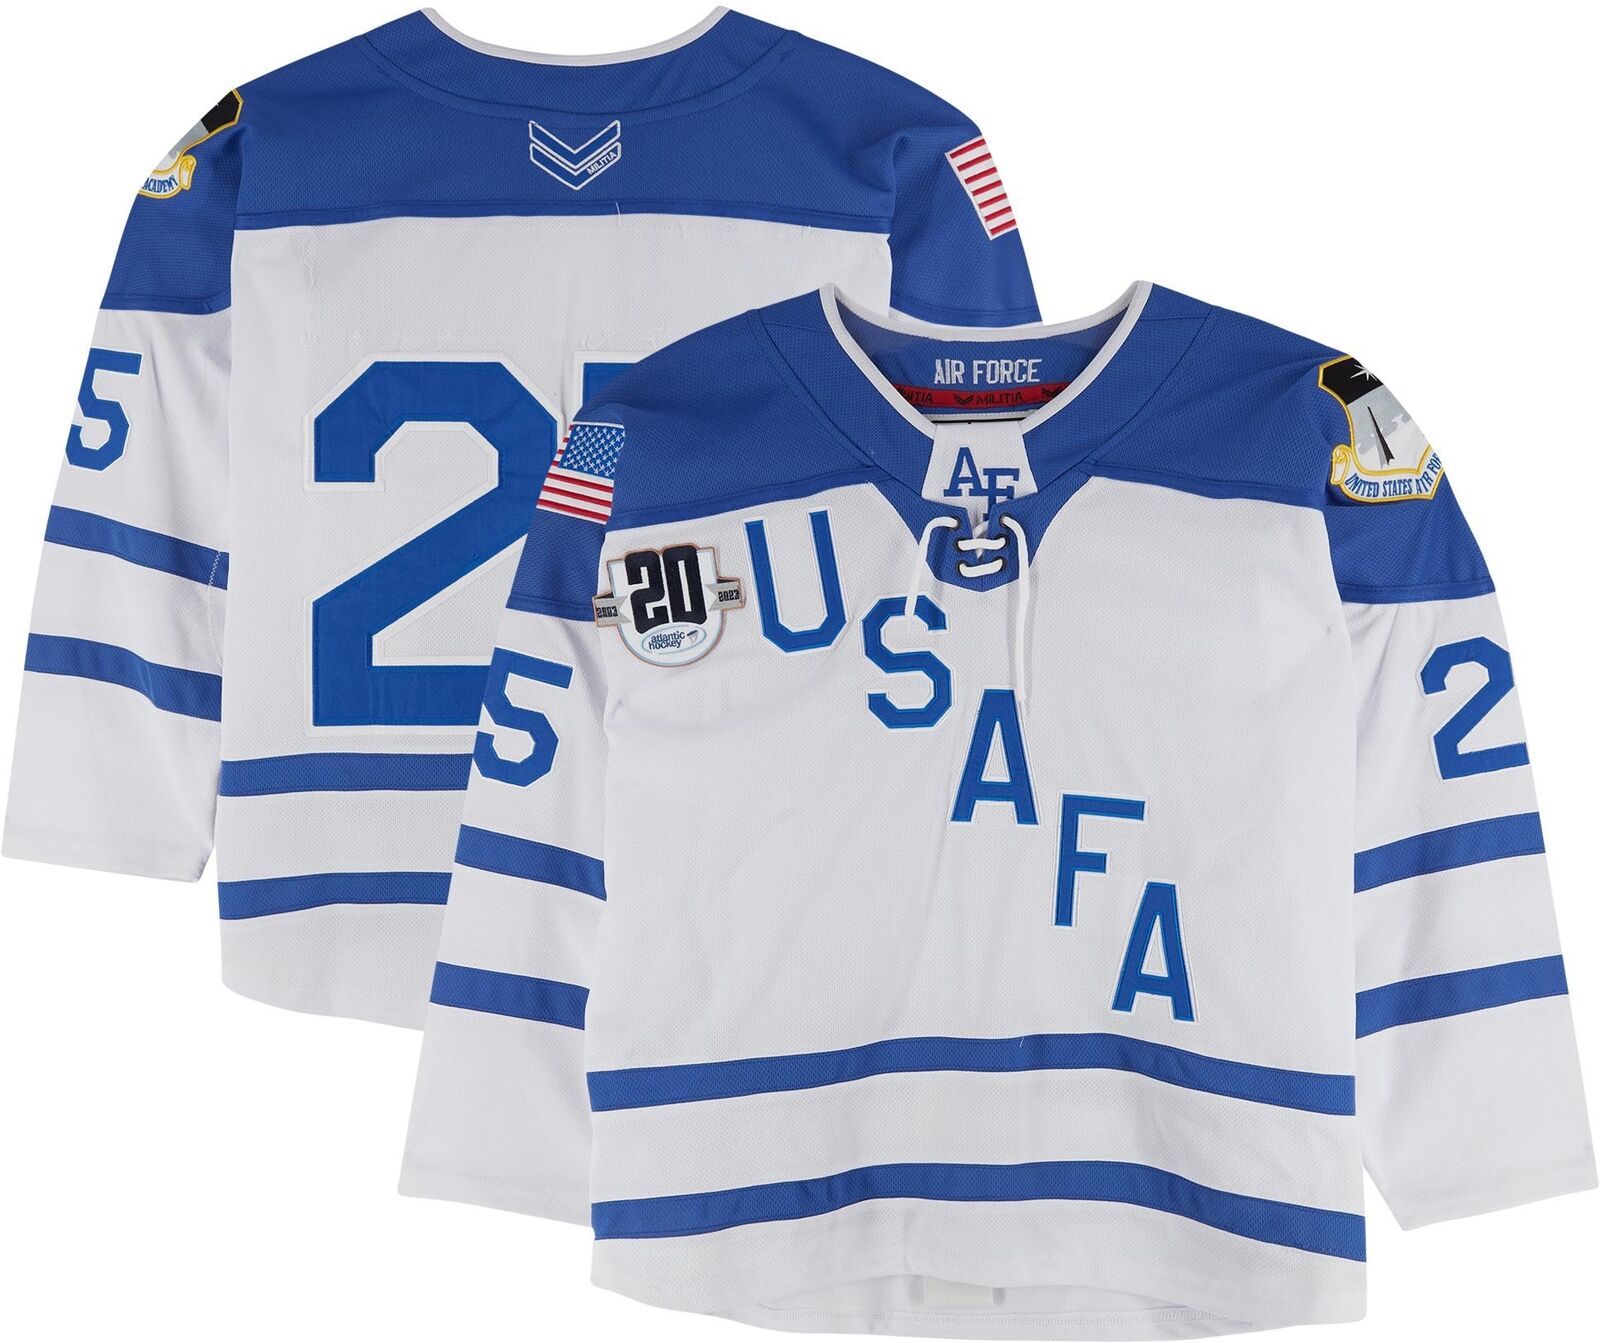 Air Force Falcons Team-Issued #25 White Jersey with 20th